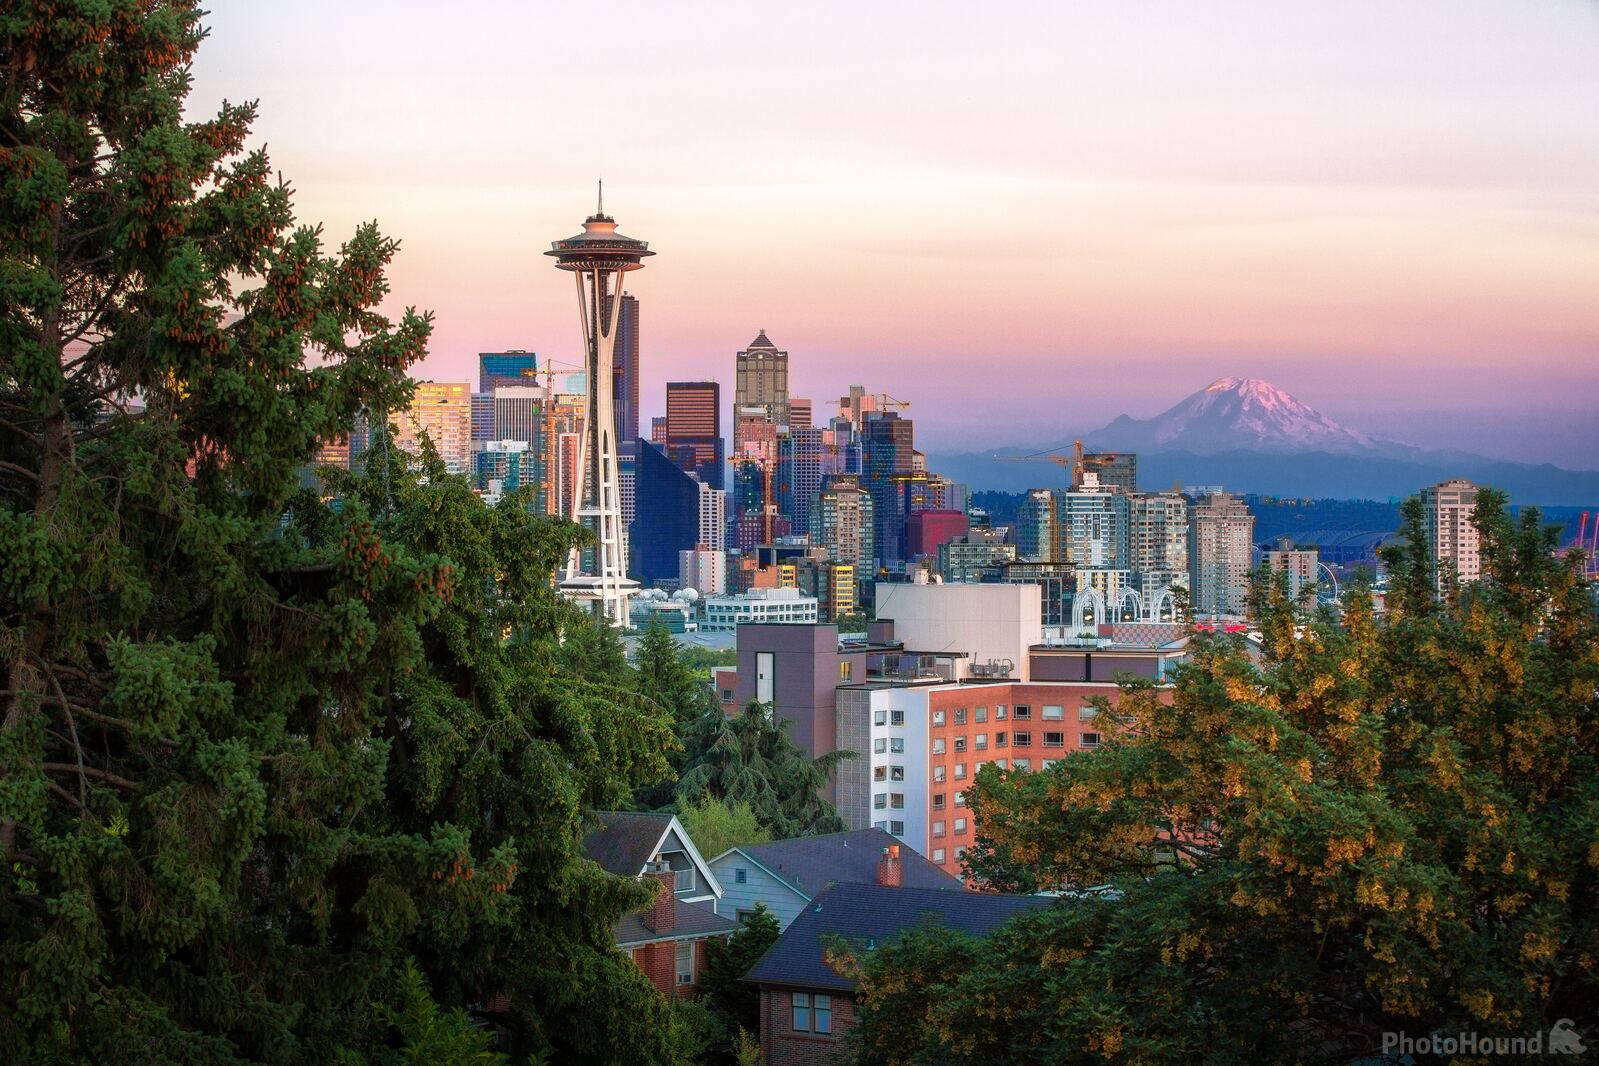 Image of Kerry Park by Team PhotoHound